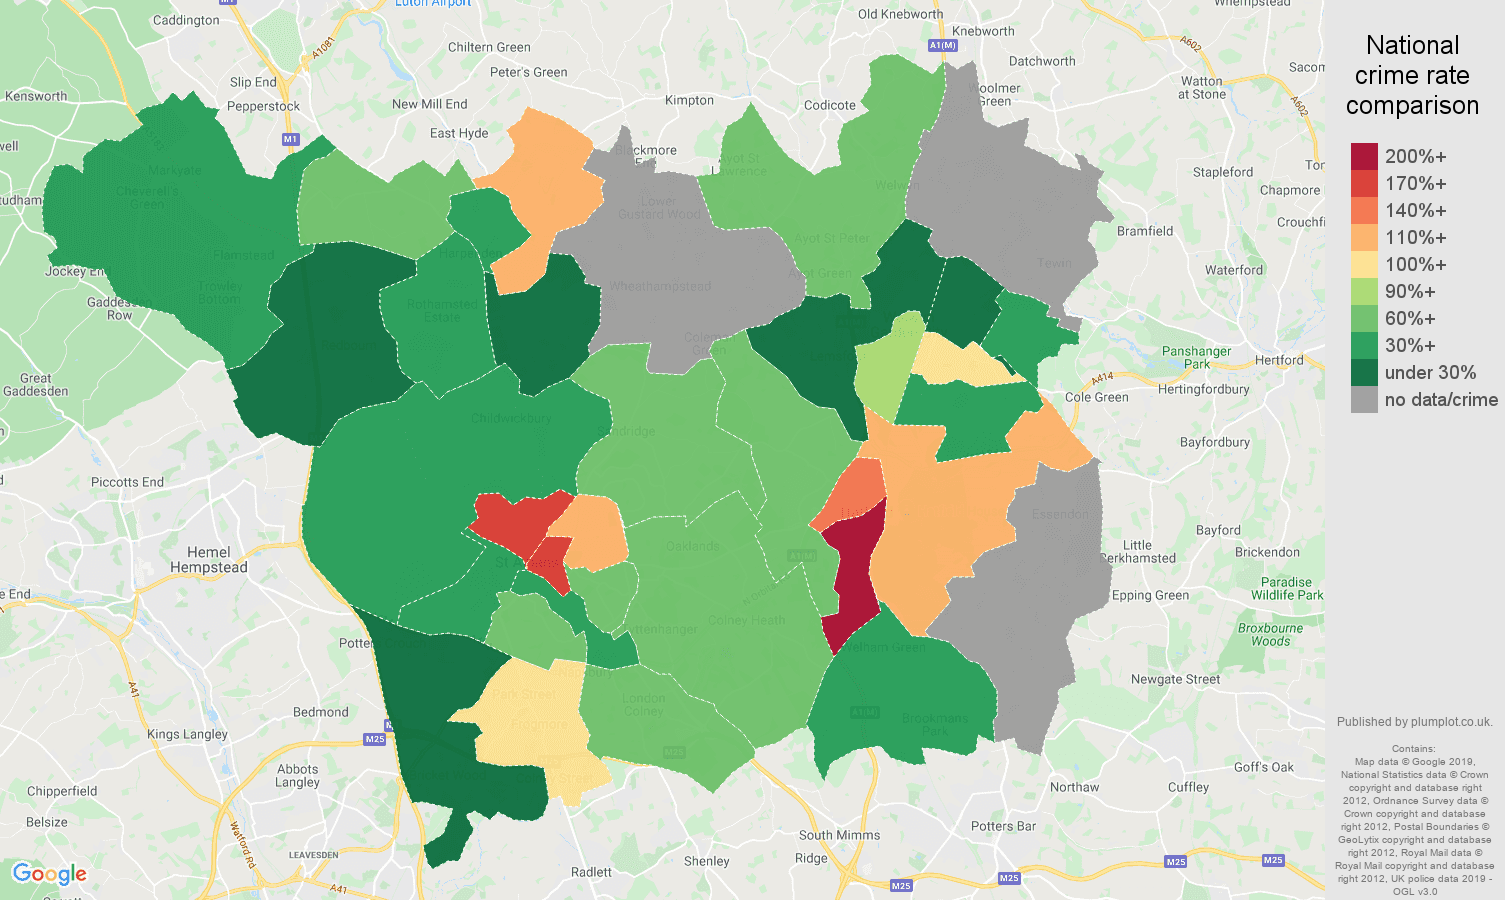 St Albans possession of weapons crime rate comparison map